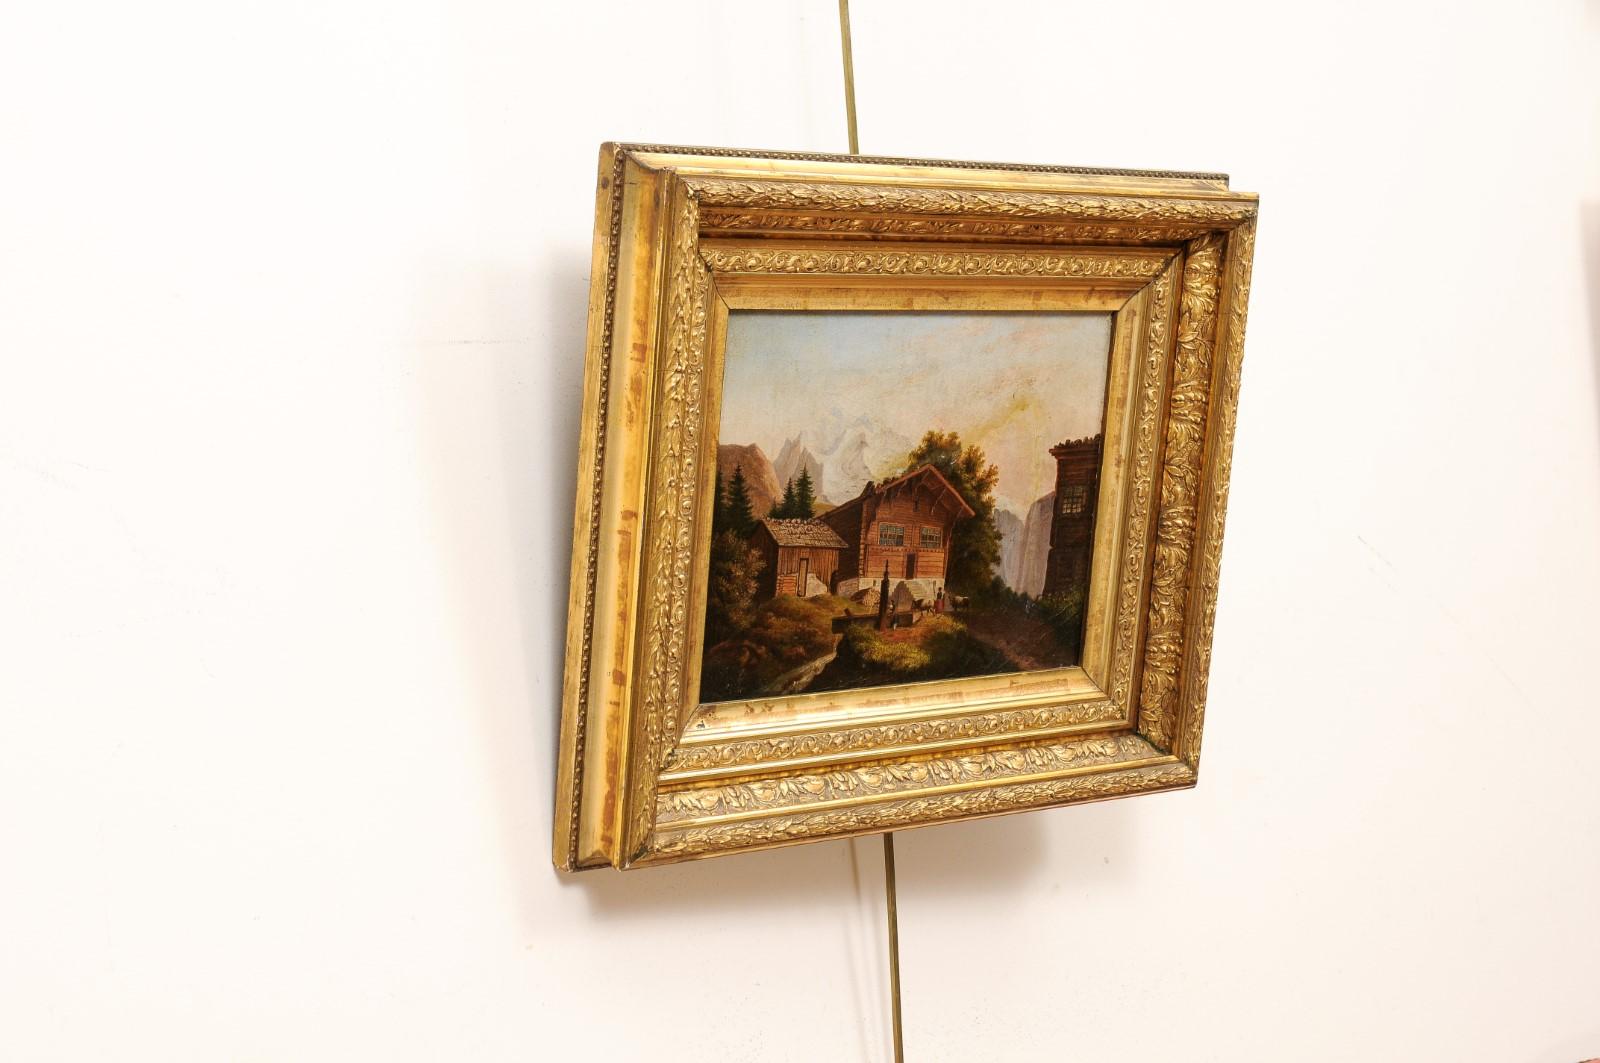  Giltwood Framed Oil on Canvas Painting of Chalet, 19th Century For Sale 7